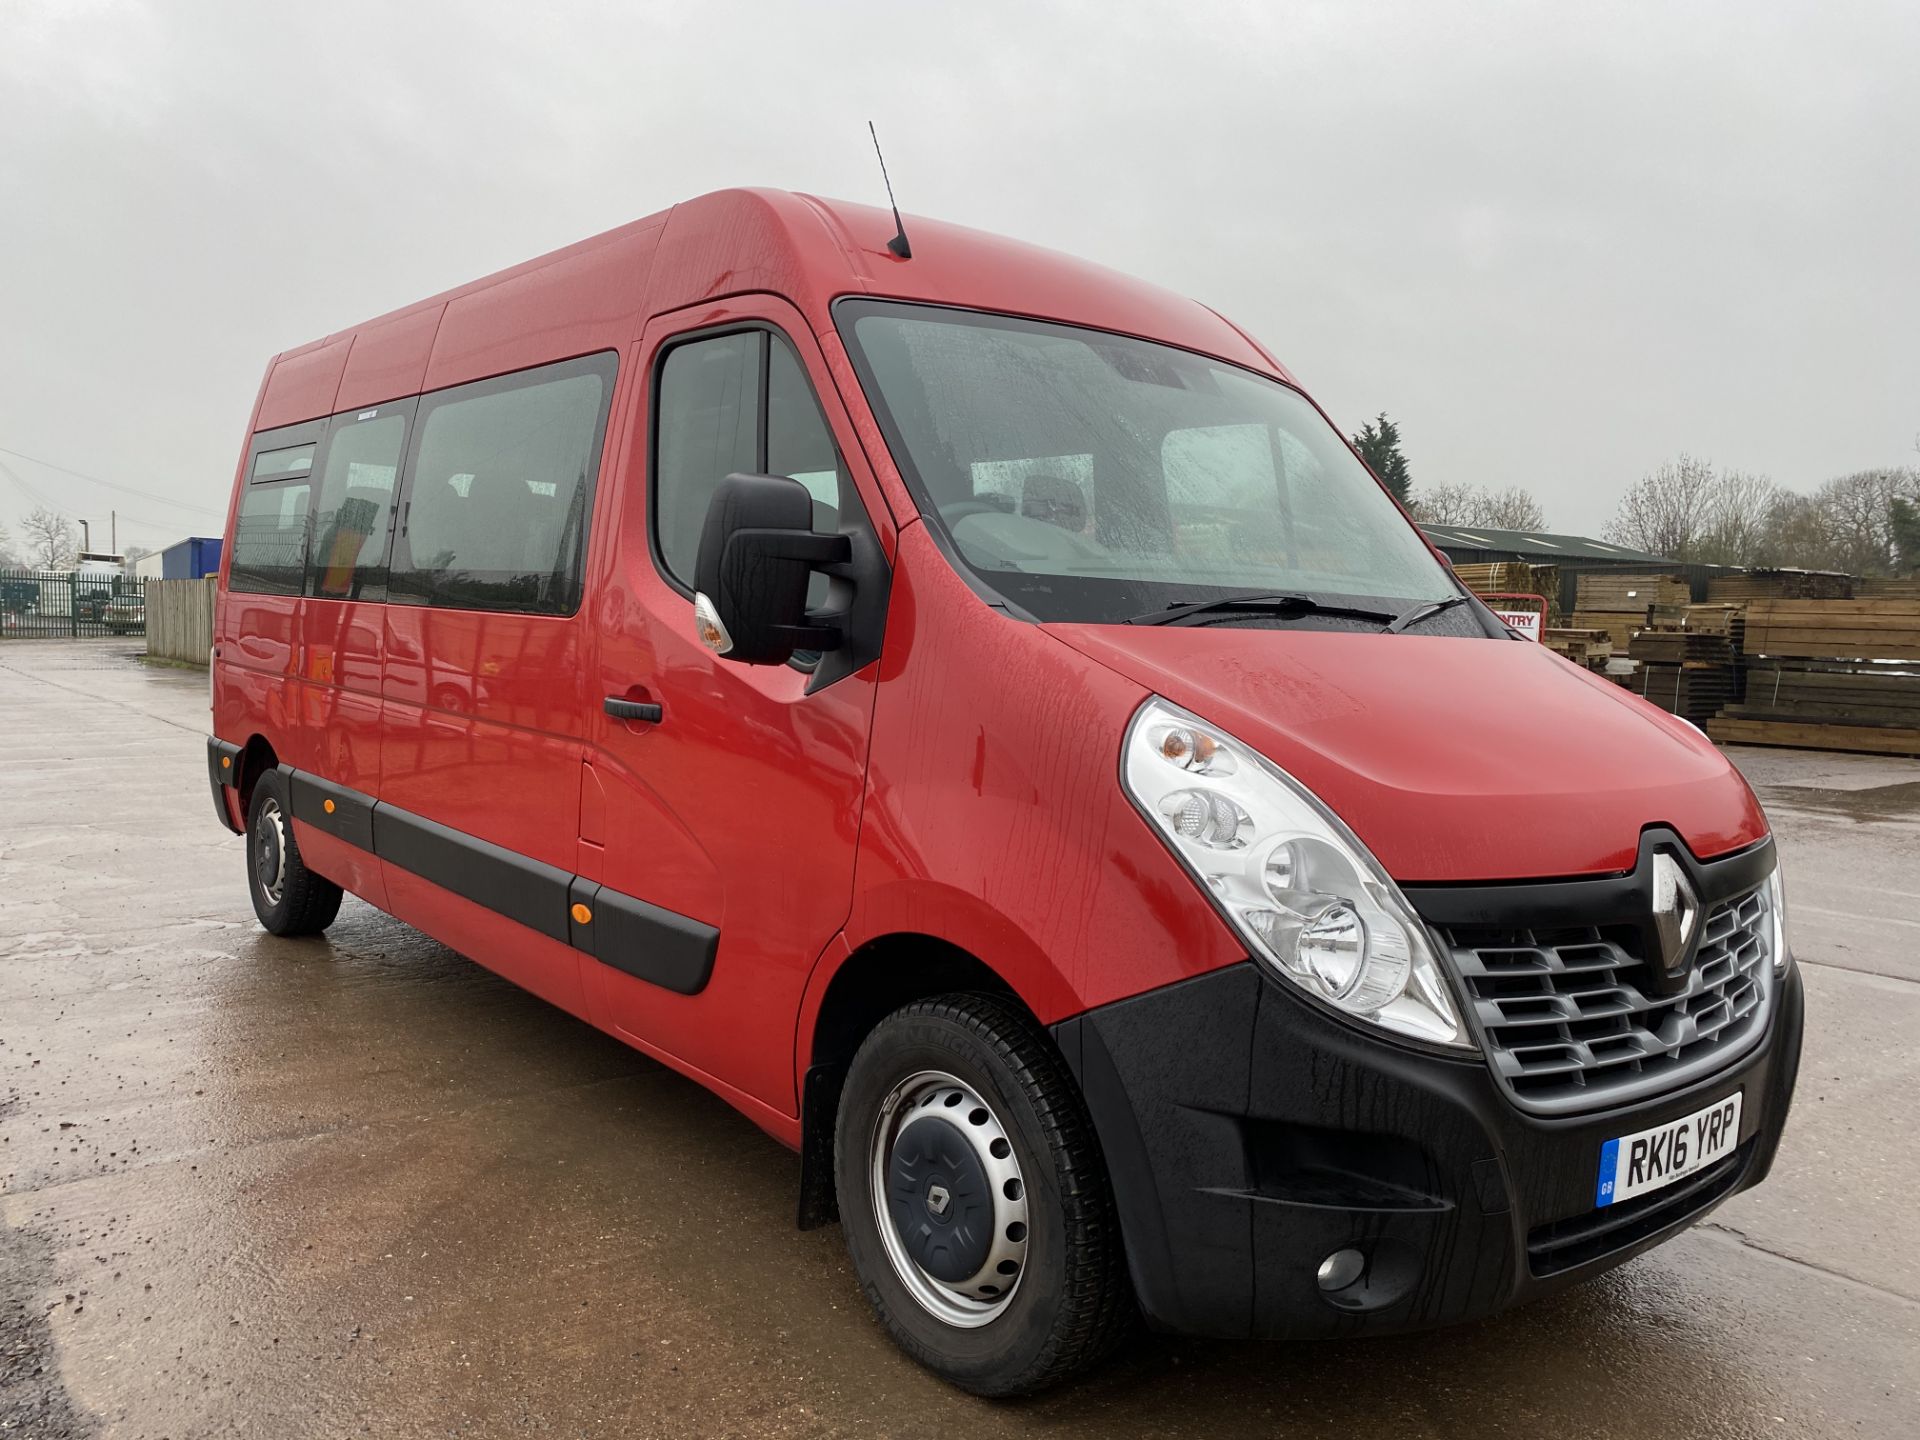 (On Sale) RENAULT MASTER LM39 2.3DCI (2016) BUSINESS ENERGY 'LWB" 17 SEATER LUXURY MINI BUS